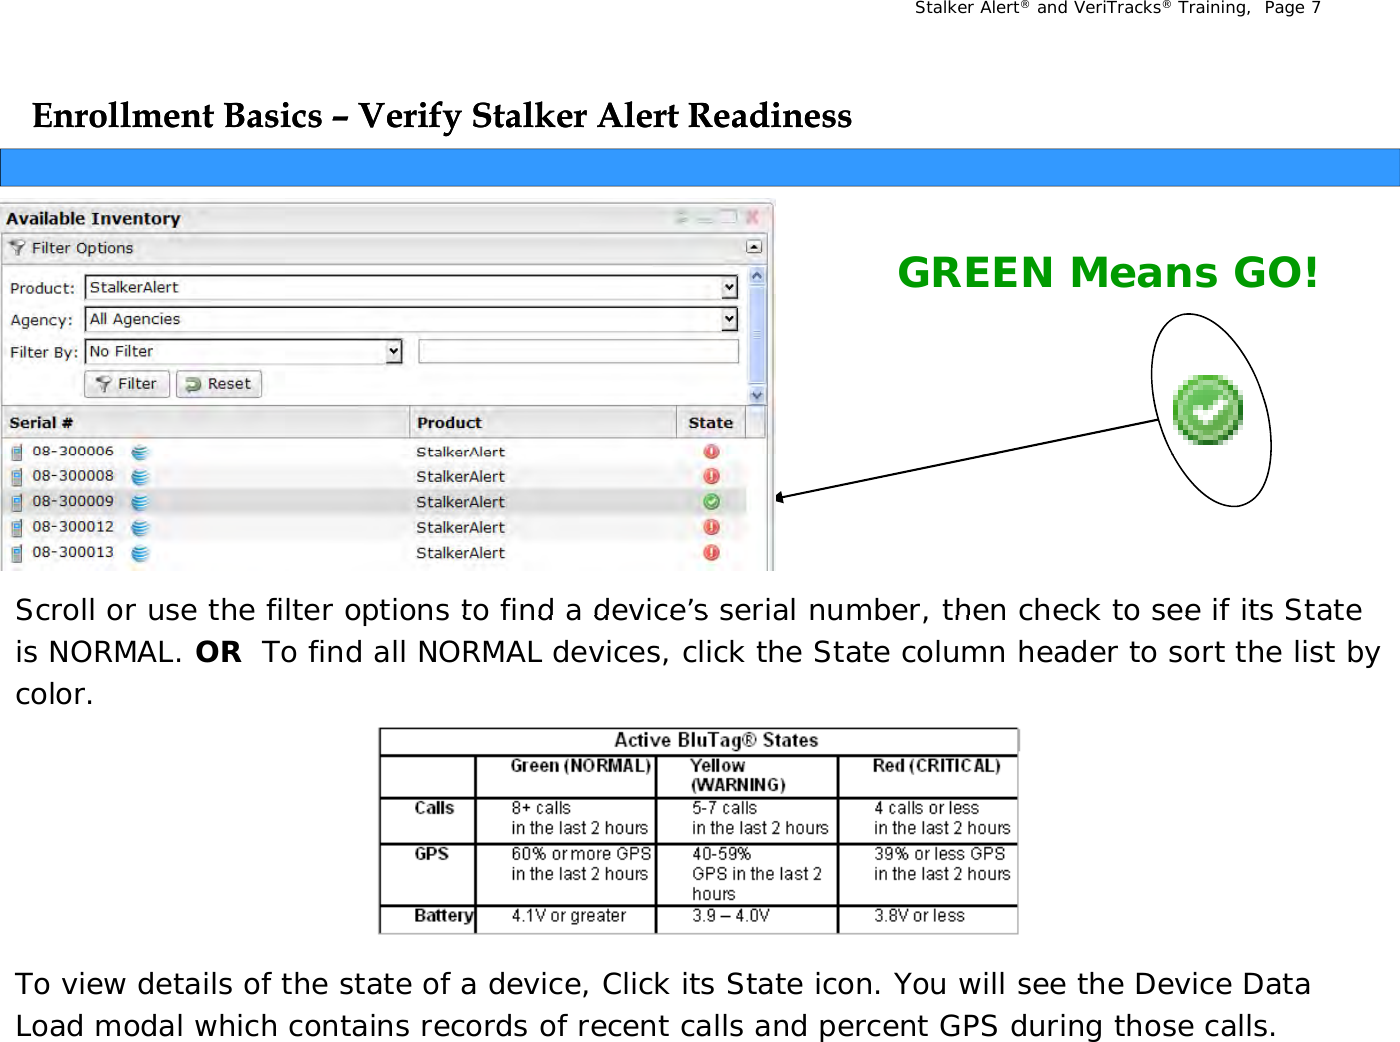 Stalker Alert®and VeriTracks®Training,  Page 7Enrollment Basics Enrollment Basics ––Verify Stalker Alert ReadinessVerify Stalker Alert ReadinessyyGREEN Means GO!Scroll or use the filter options to find a device’s serial number  then check to see if its State Scroll or use the filter options to find a device s serial number, then check to see if its State is NORMAL. OR  To find all NORMAL devices, click the State column header to sort the list by color.To view details of the state of a device, Click its State icon. You will see the Device Data Load modal which contains records of recent calls and percent GPS during those calls.